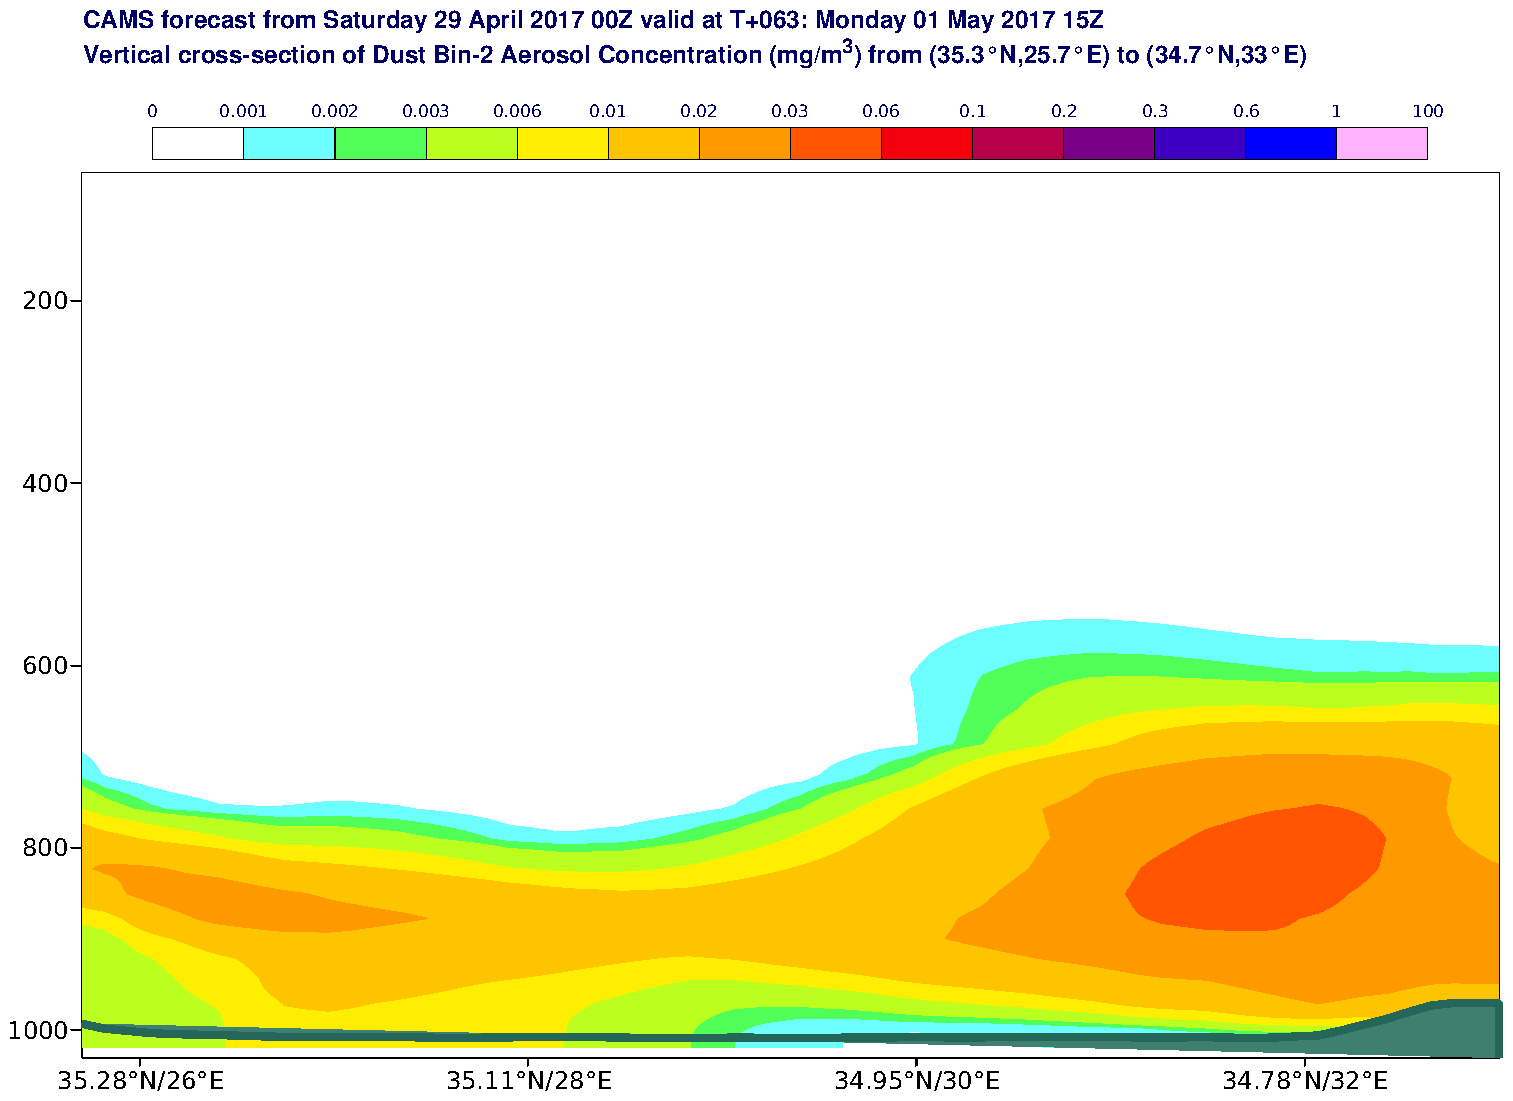 Vertical cross-section of Dust Bin-2 Aerosol Concentration (mg/m3) valid at T63 - 2017-05-01 15:00